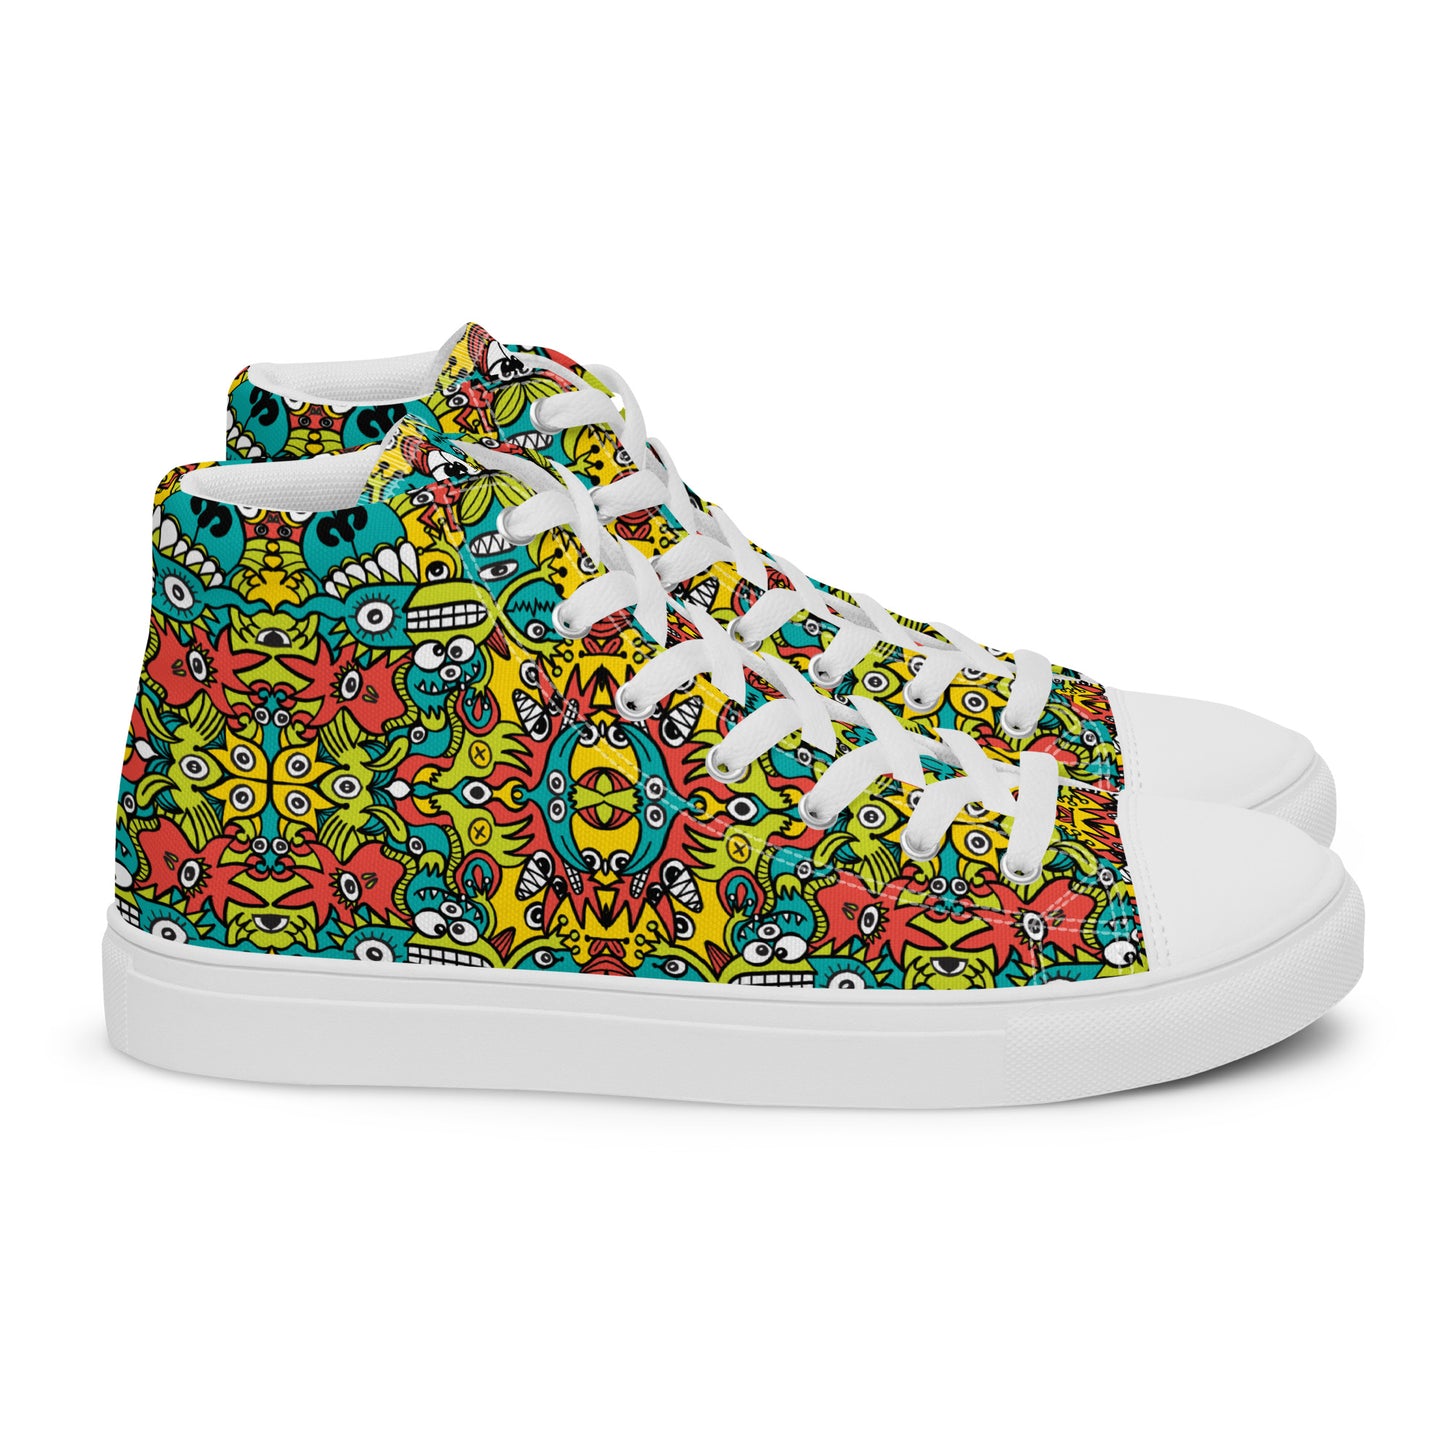 Doodle Dreamscape: Cosmic Critter Carnival - Women’s high top canvas shoes. Side view